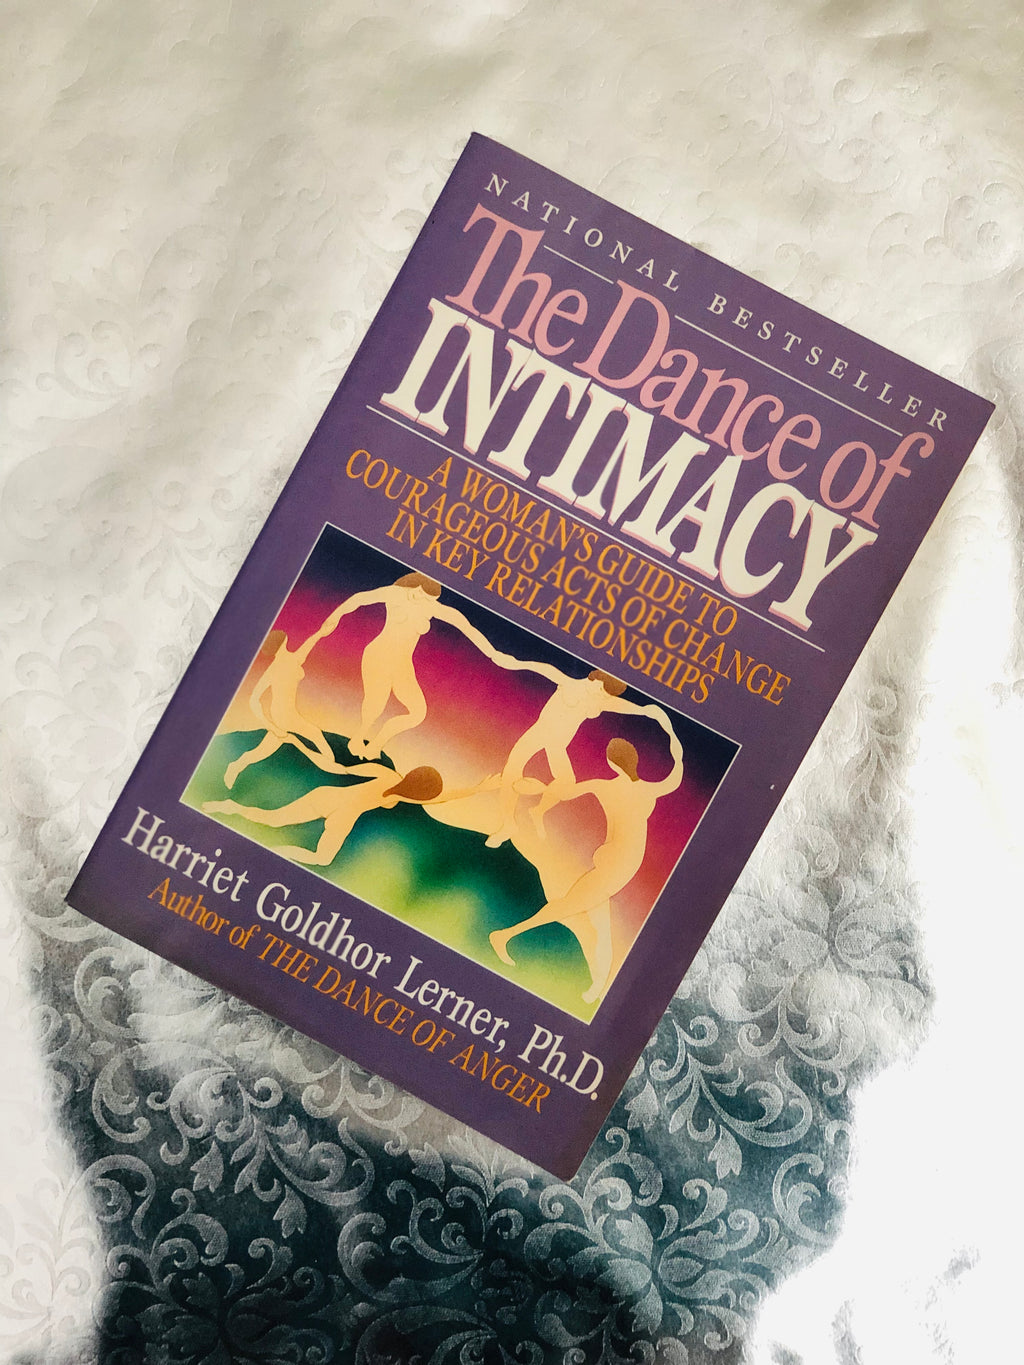 The Dance Of Intimacy- By Harriet Goldhor Lerner, Ph.D.